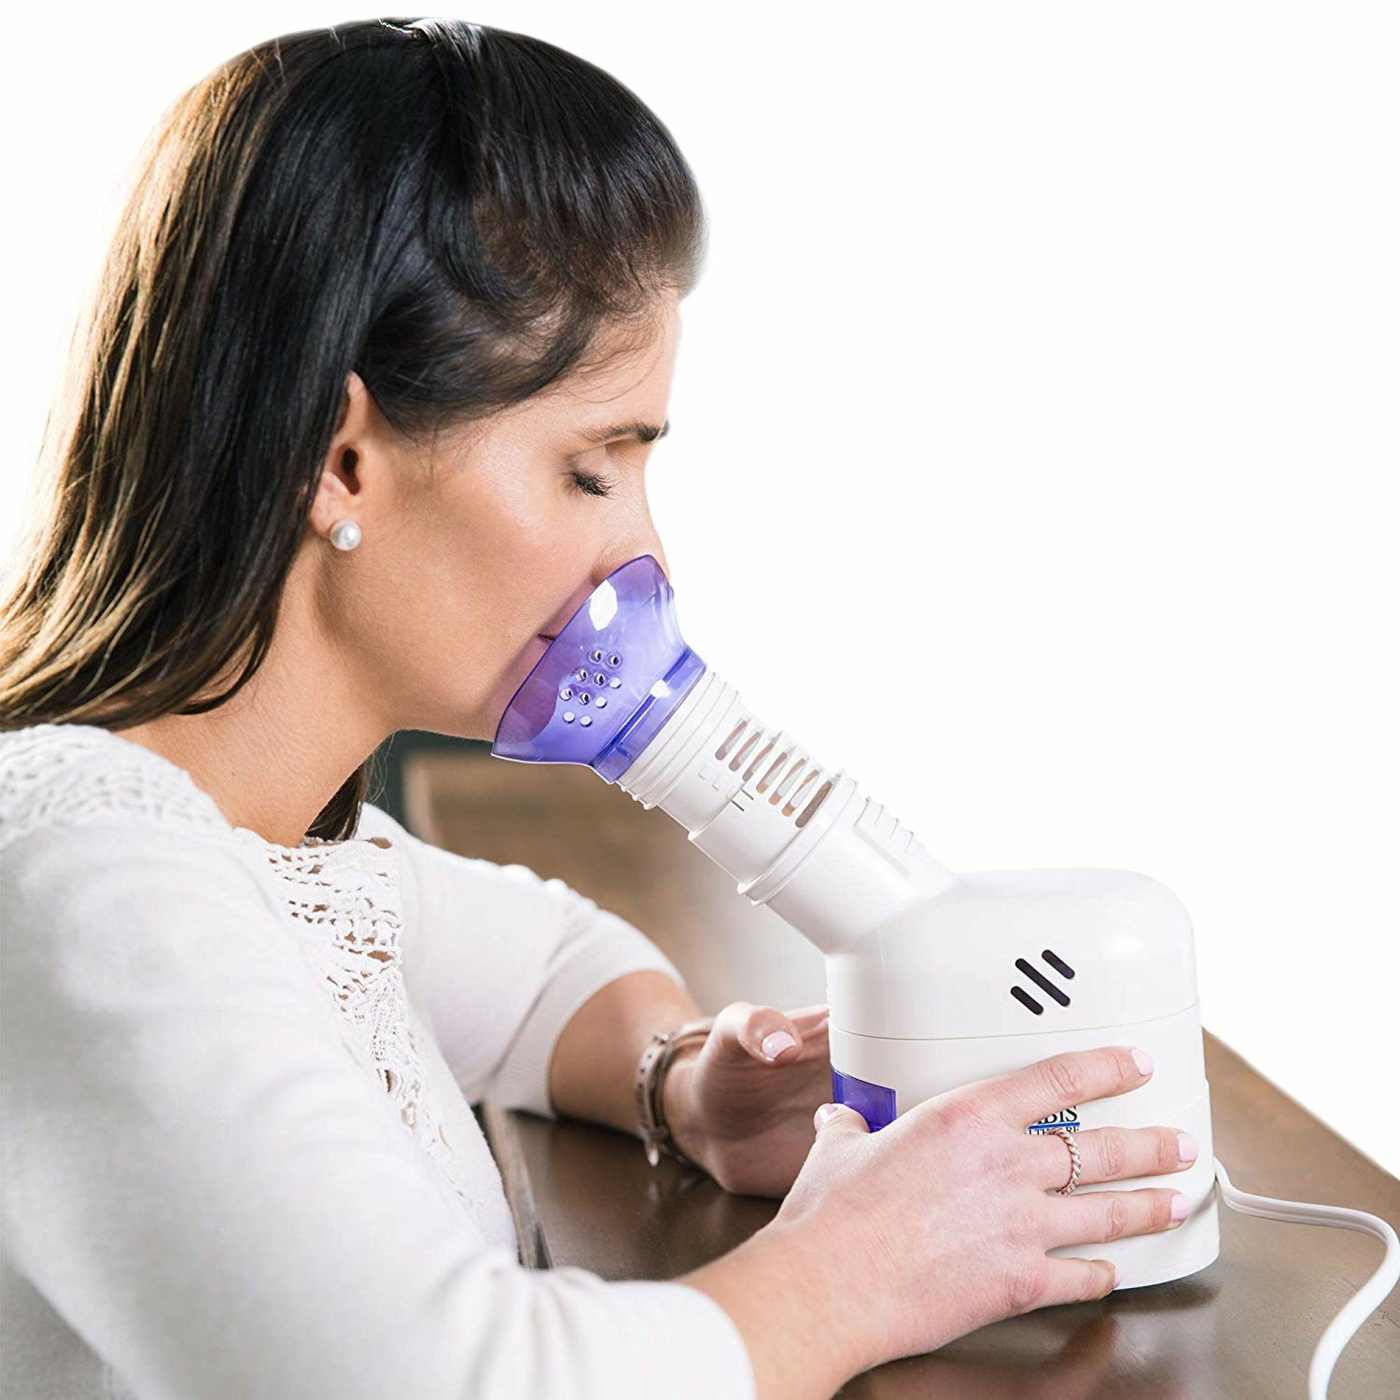 Special inhalers are also suitable for children and reduce the risk of burns